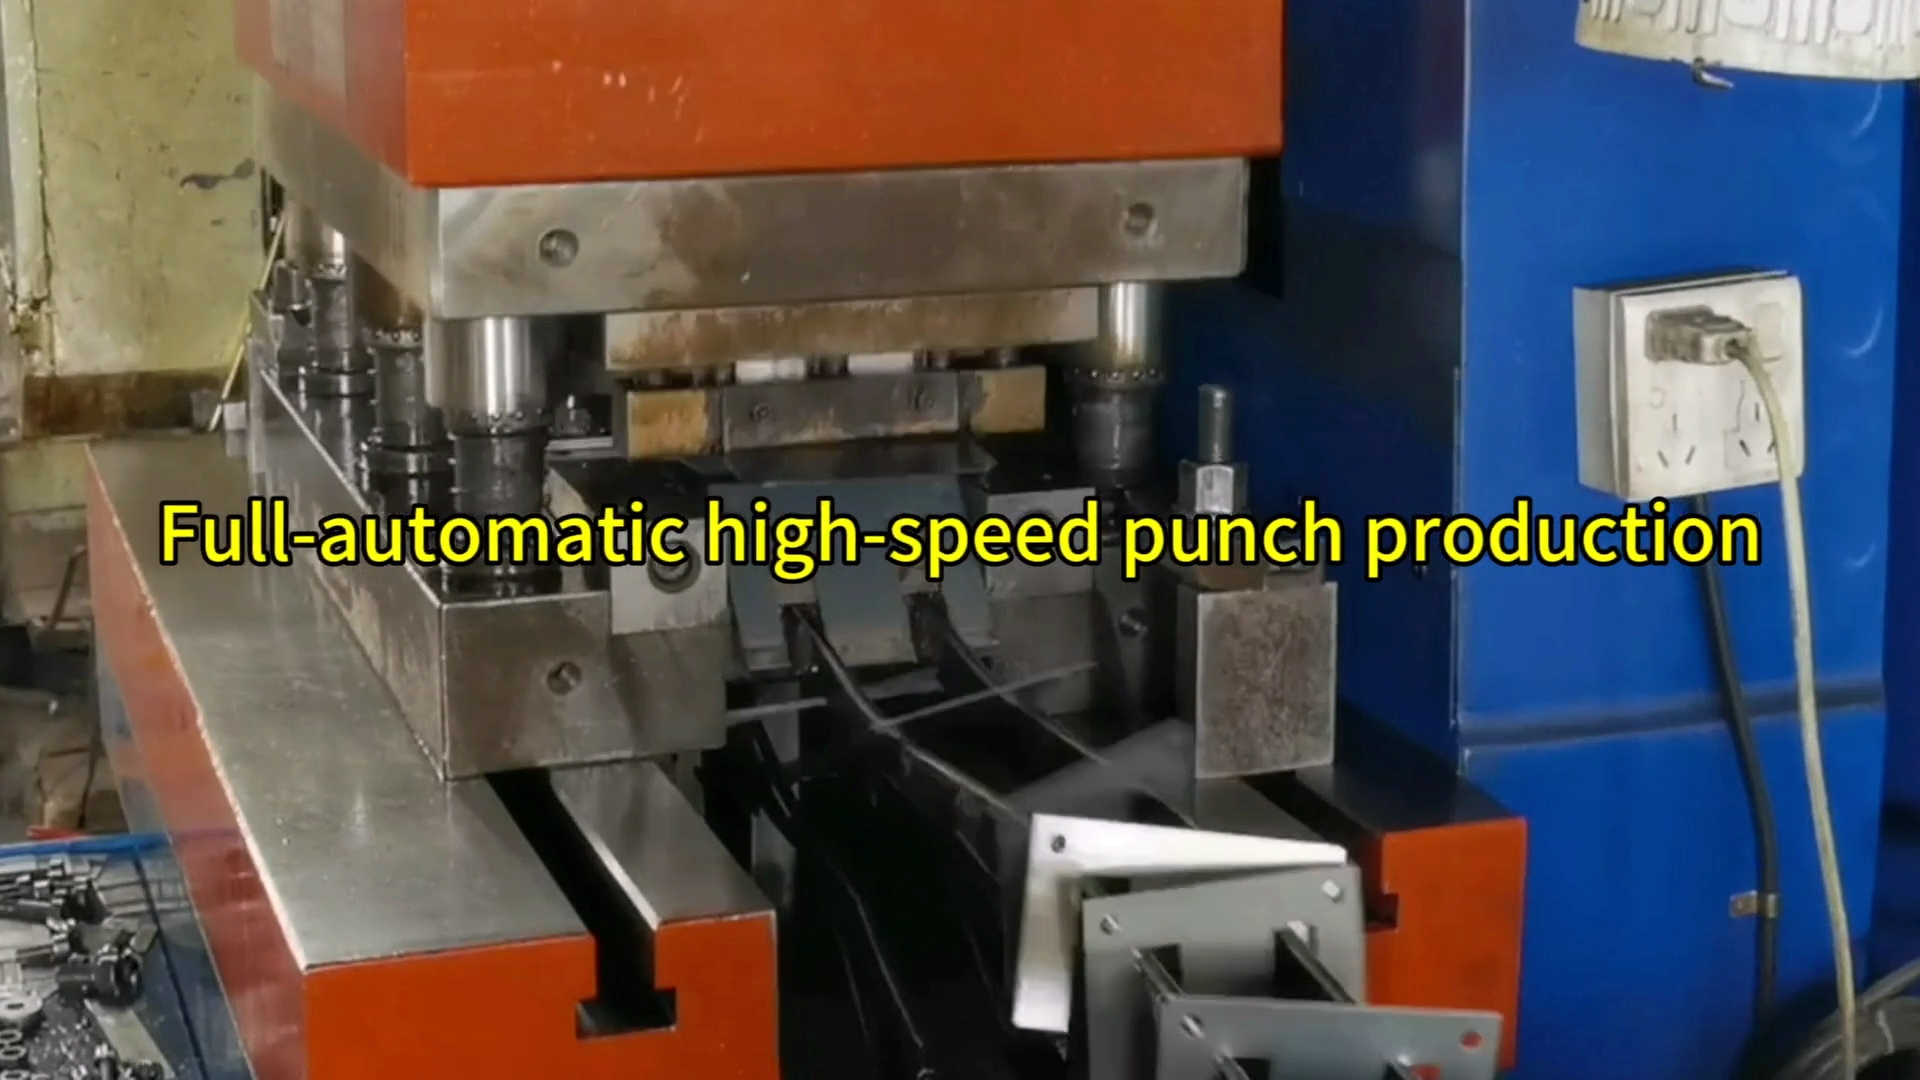 Full-automatic high-speed punch production